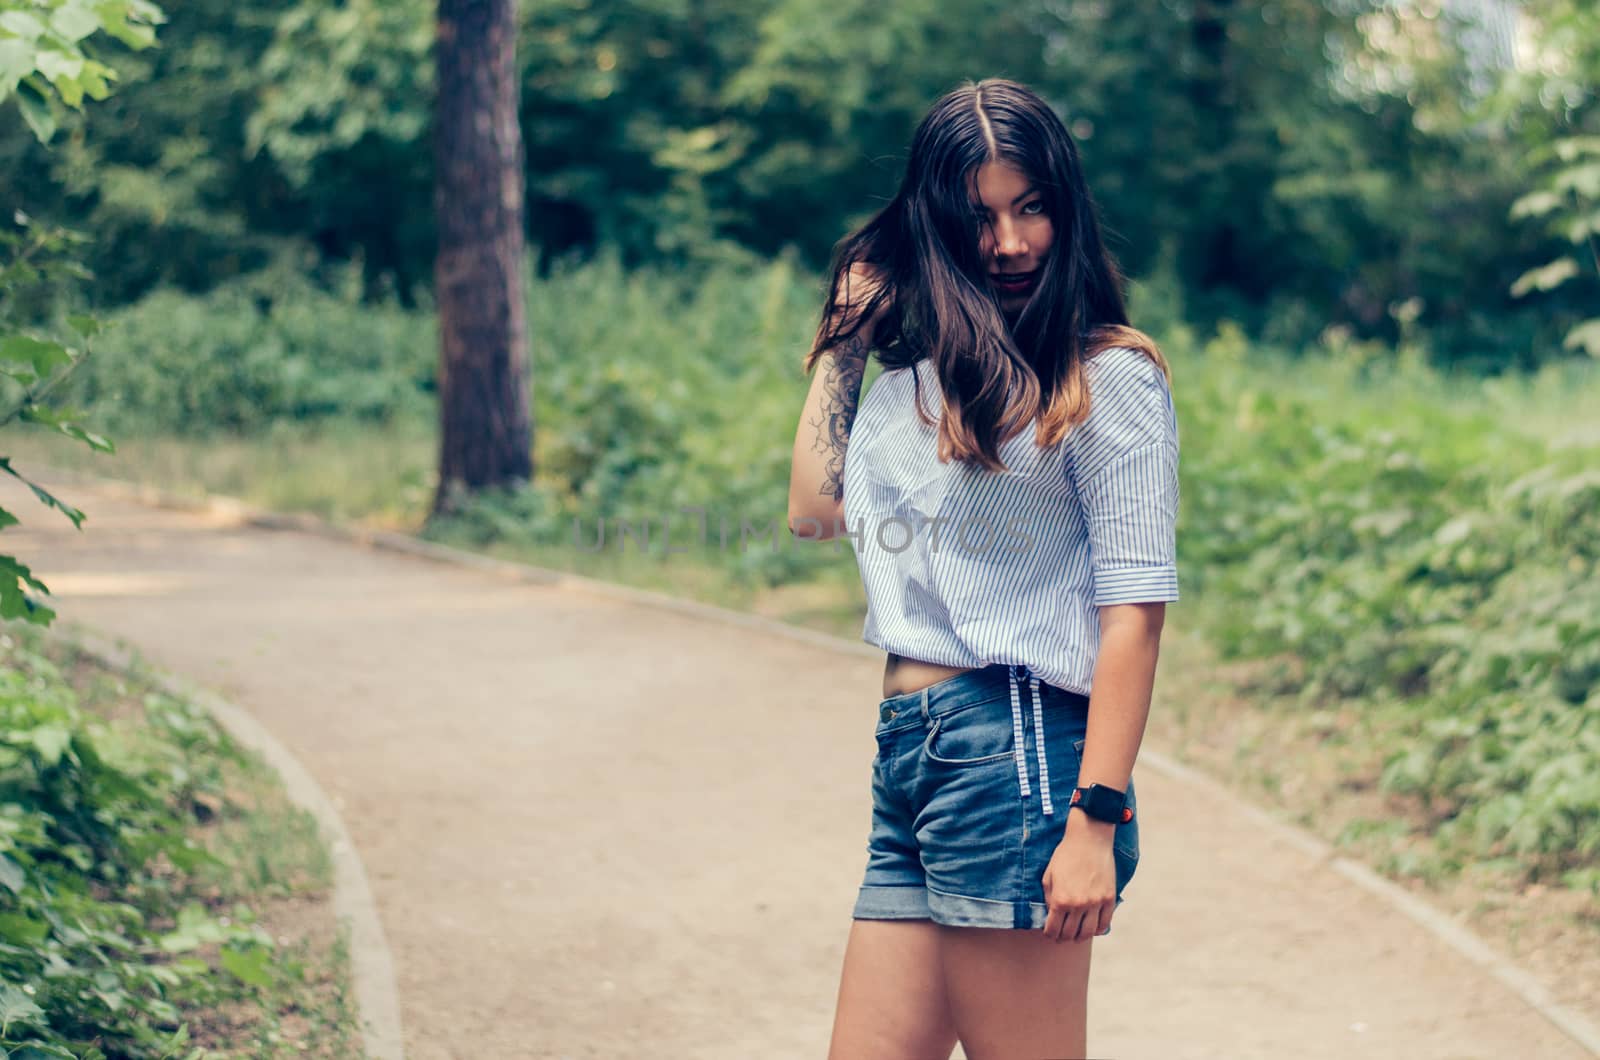 Young fashion woman with long dark hair posing on the road in a park.